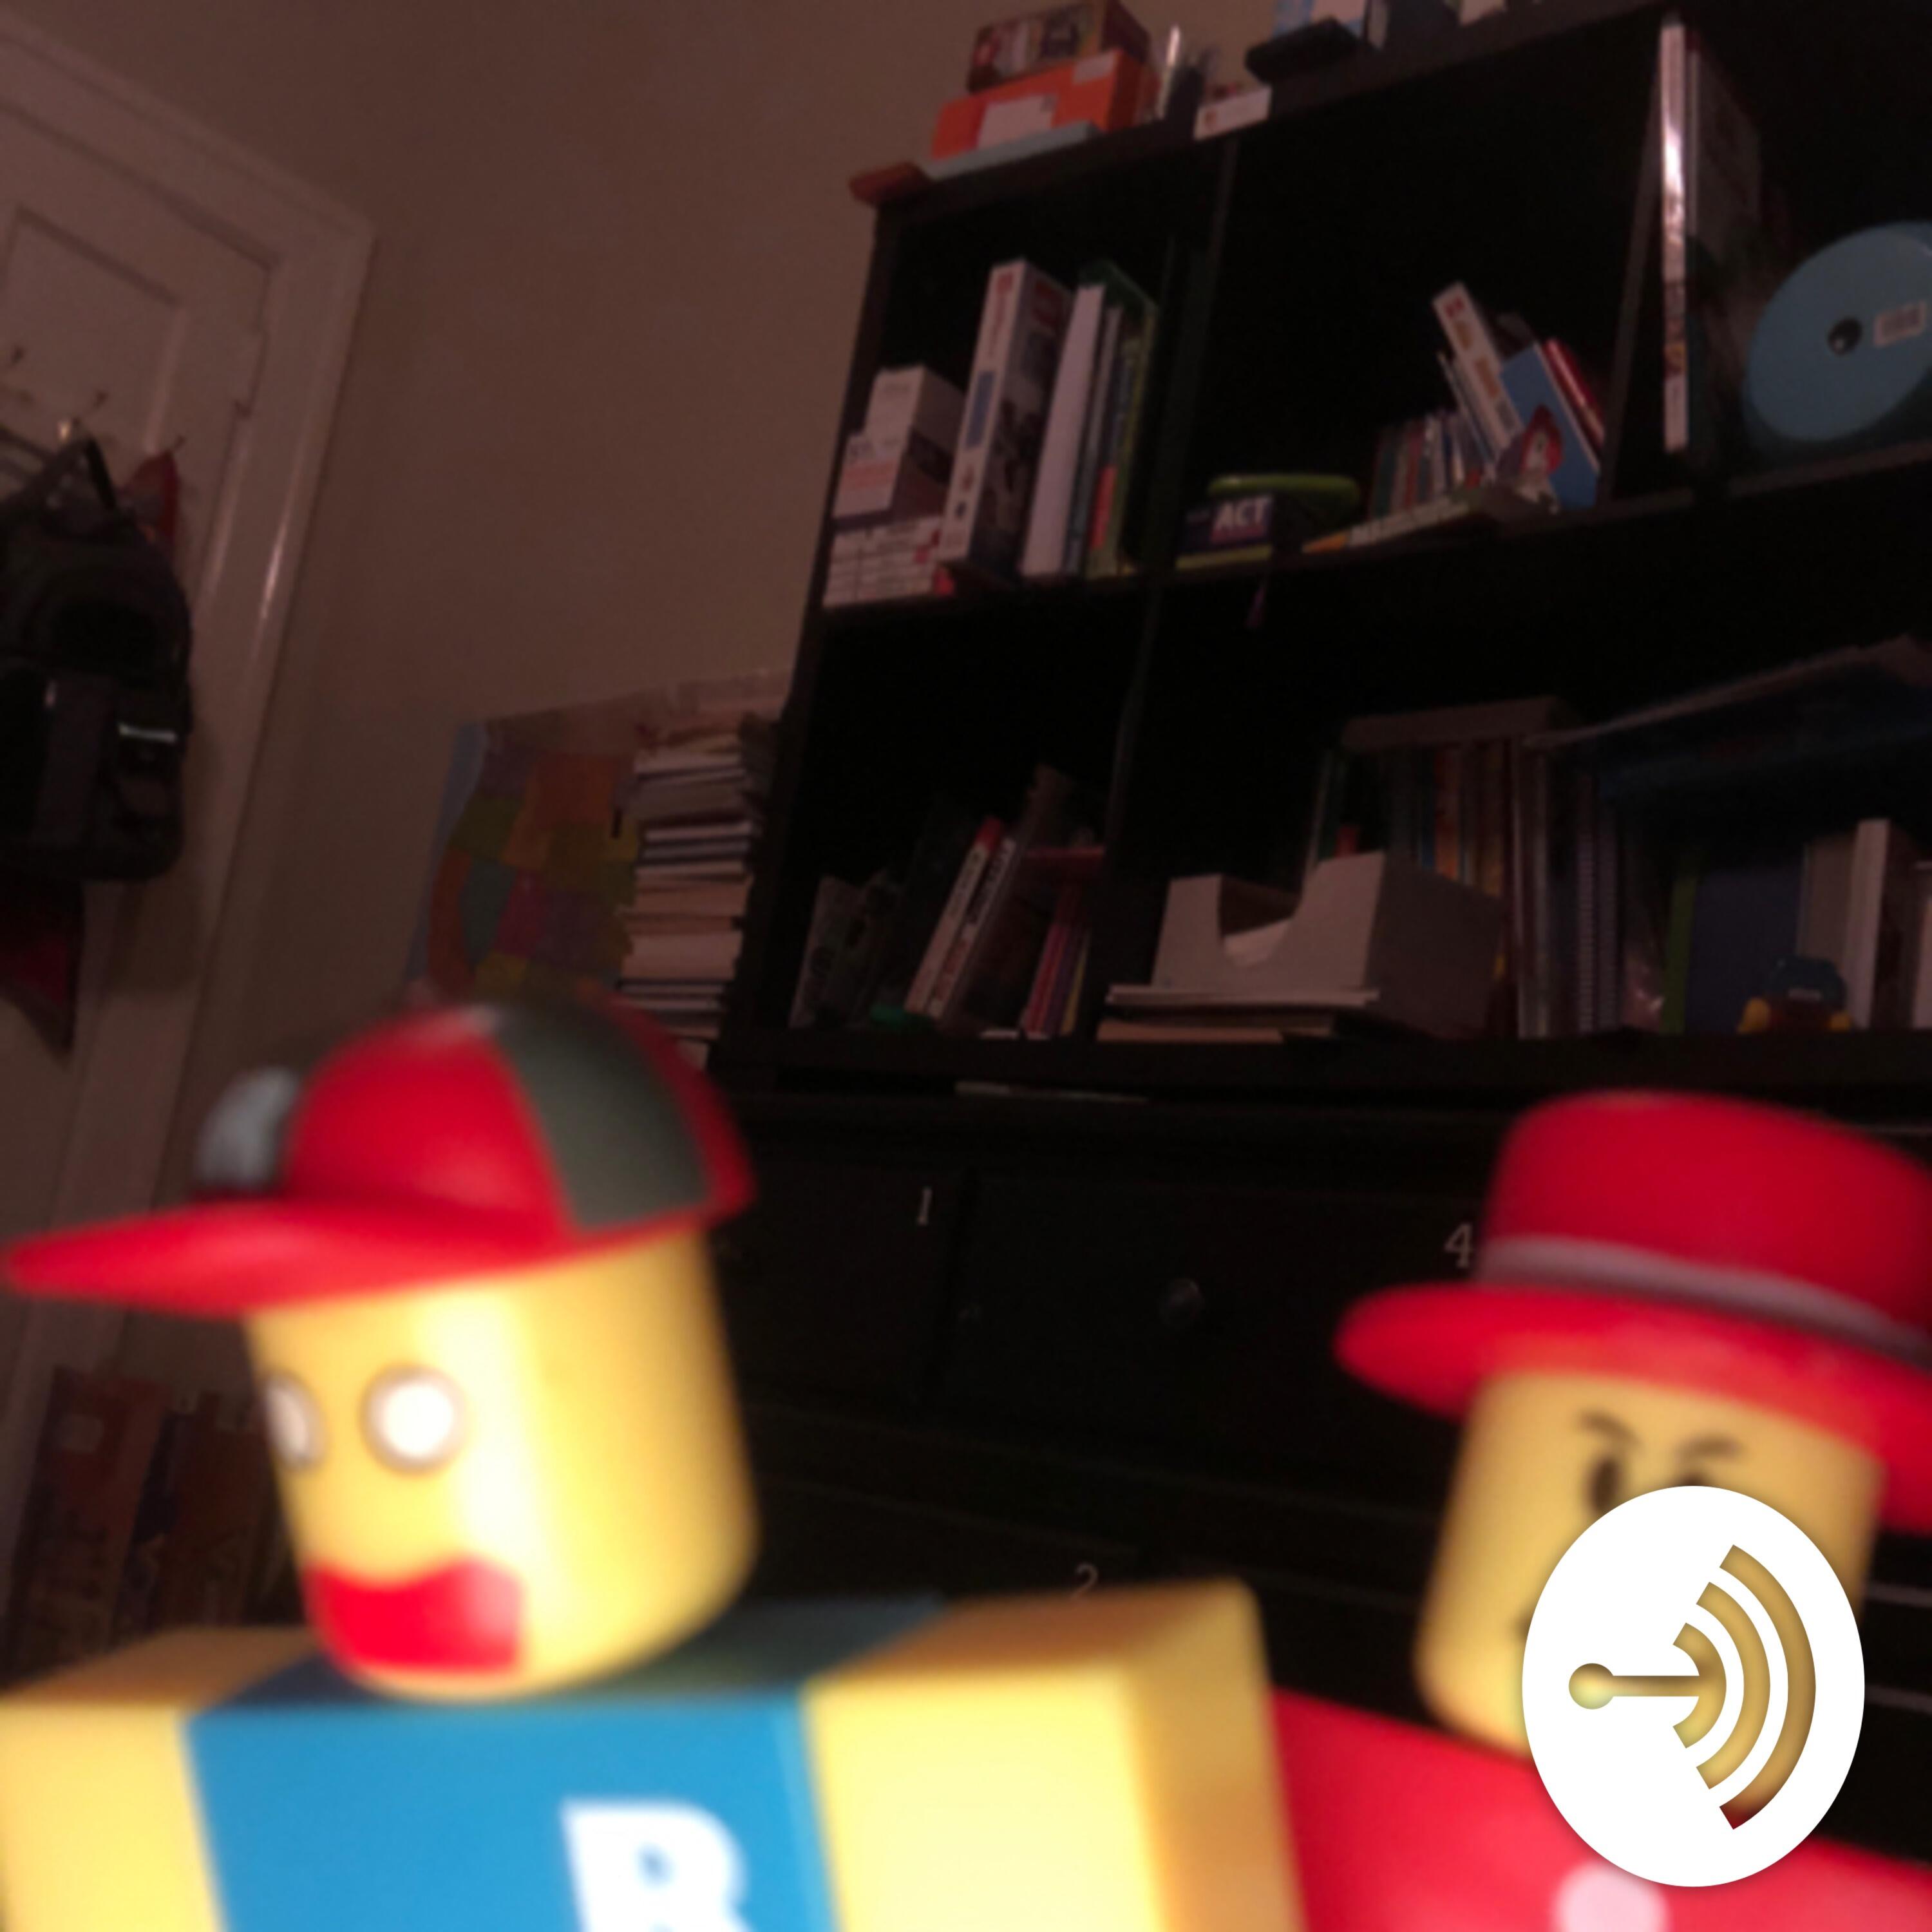 Listen To The Michael Episode Roblox In Real Life The Very Advanced Obby On Iheartradio Iheartradio - michael roblox in real life the very advanced obby on